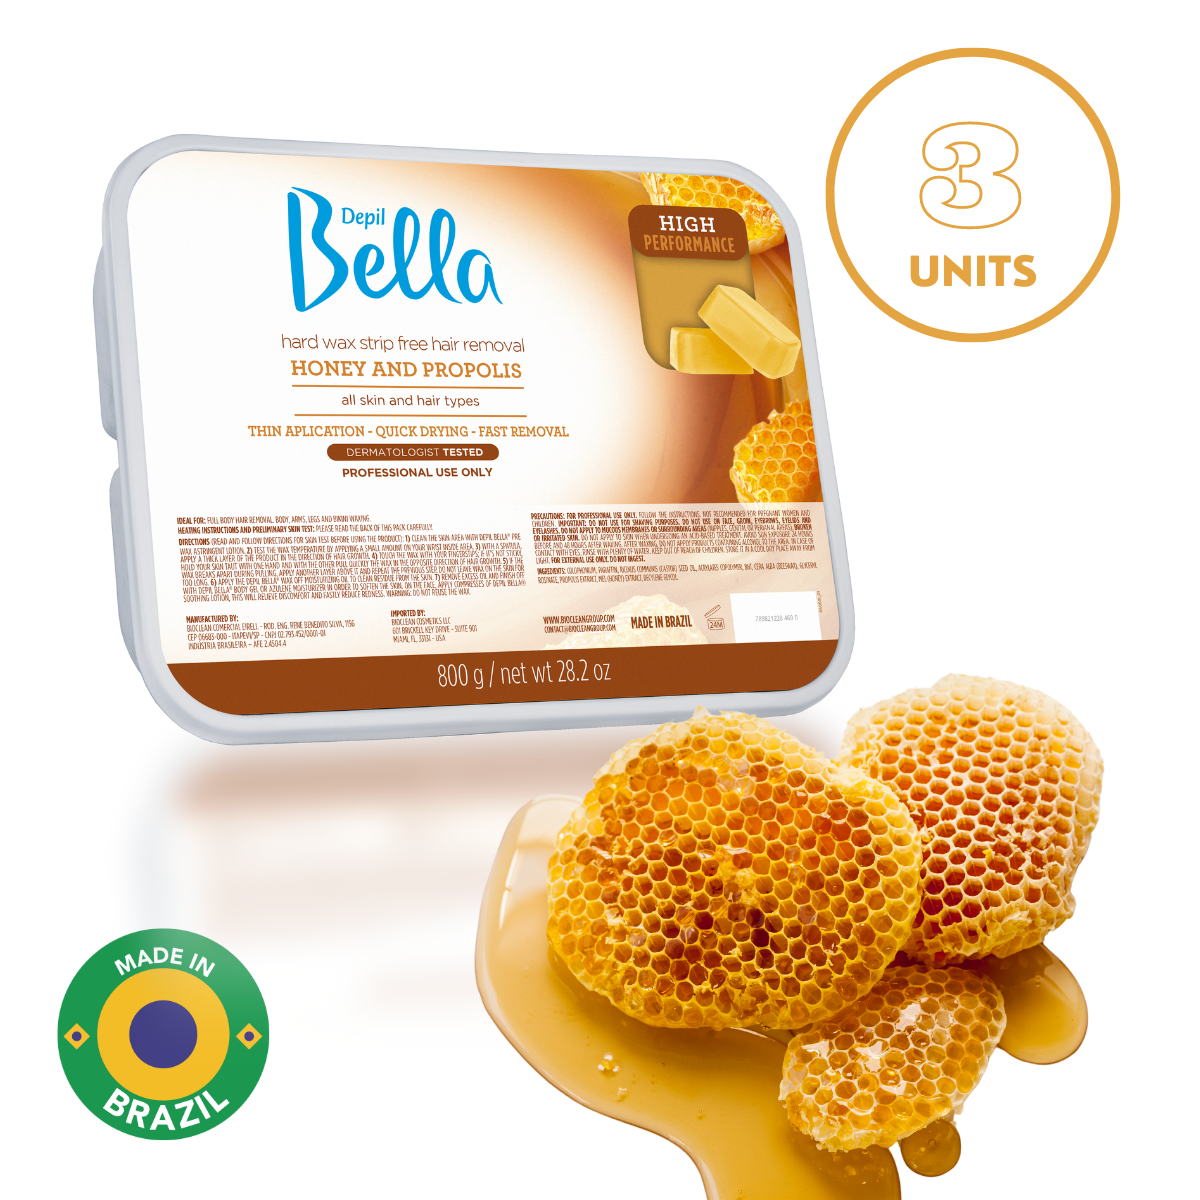 Depil Bella High Performance Hard Wax with Honey and Propolis, 28.2 Oz - Professional Hair Removal